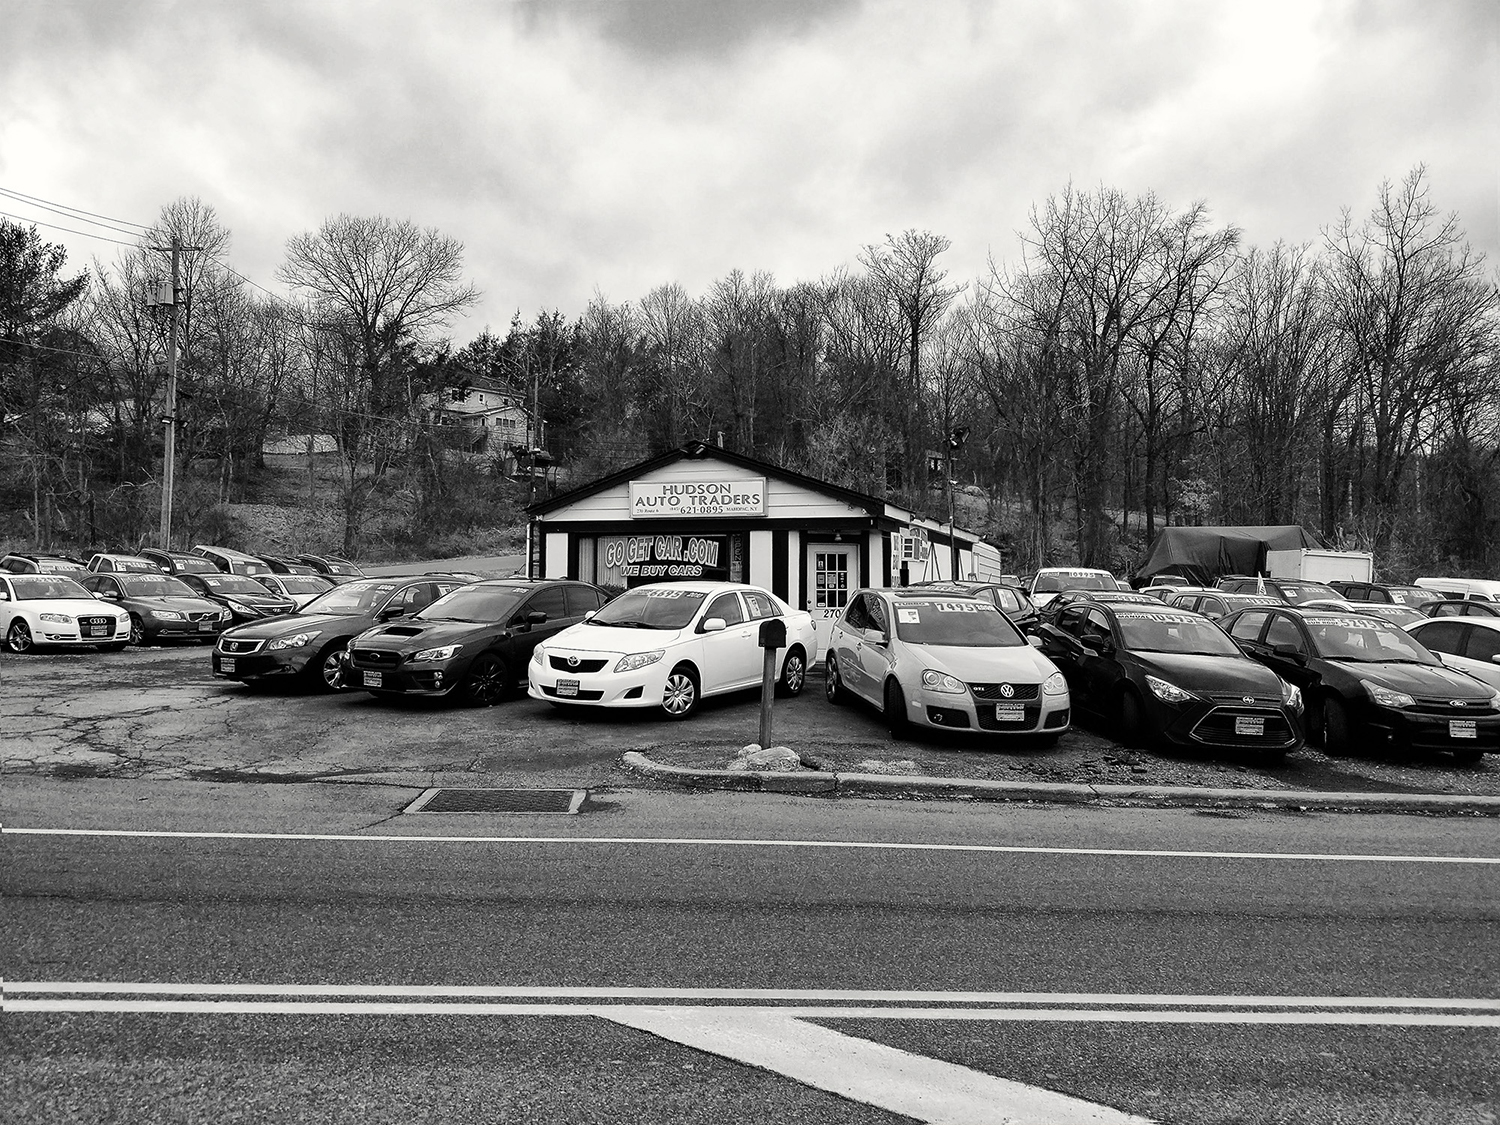 Car Lot ©2021 by bret wills